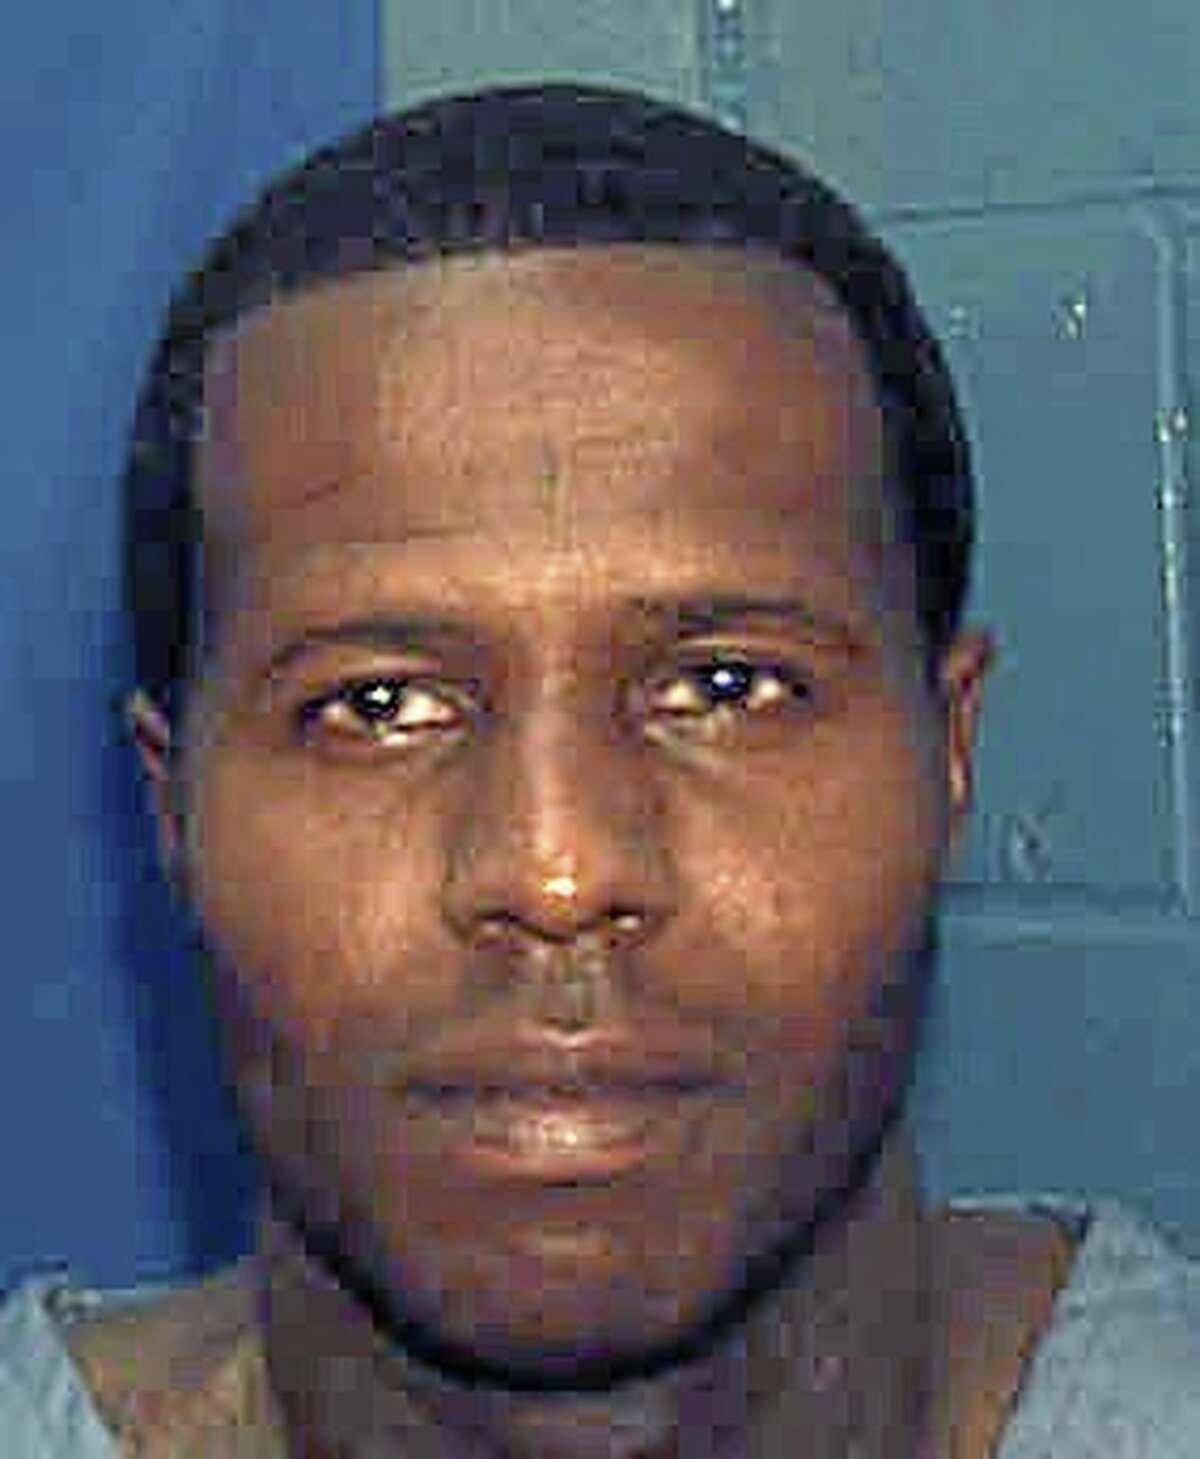 This undated photo made available by the Florida Department of Corrections shows Charles Walker. Walker and Joseph Jenkins were mistakenly released from prison in Franklin County, Fla., in late September and early October. According to authorities, the the two convicted murderers were released with forged documents. A manhunt is under way for the two men. (AP Photo/Florida Dept. of Corrections,HO)